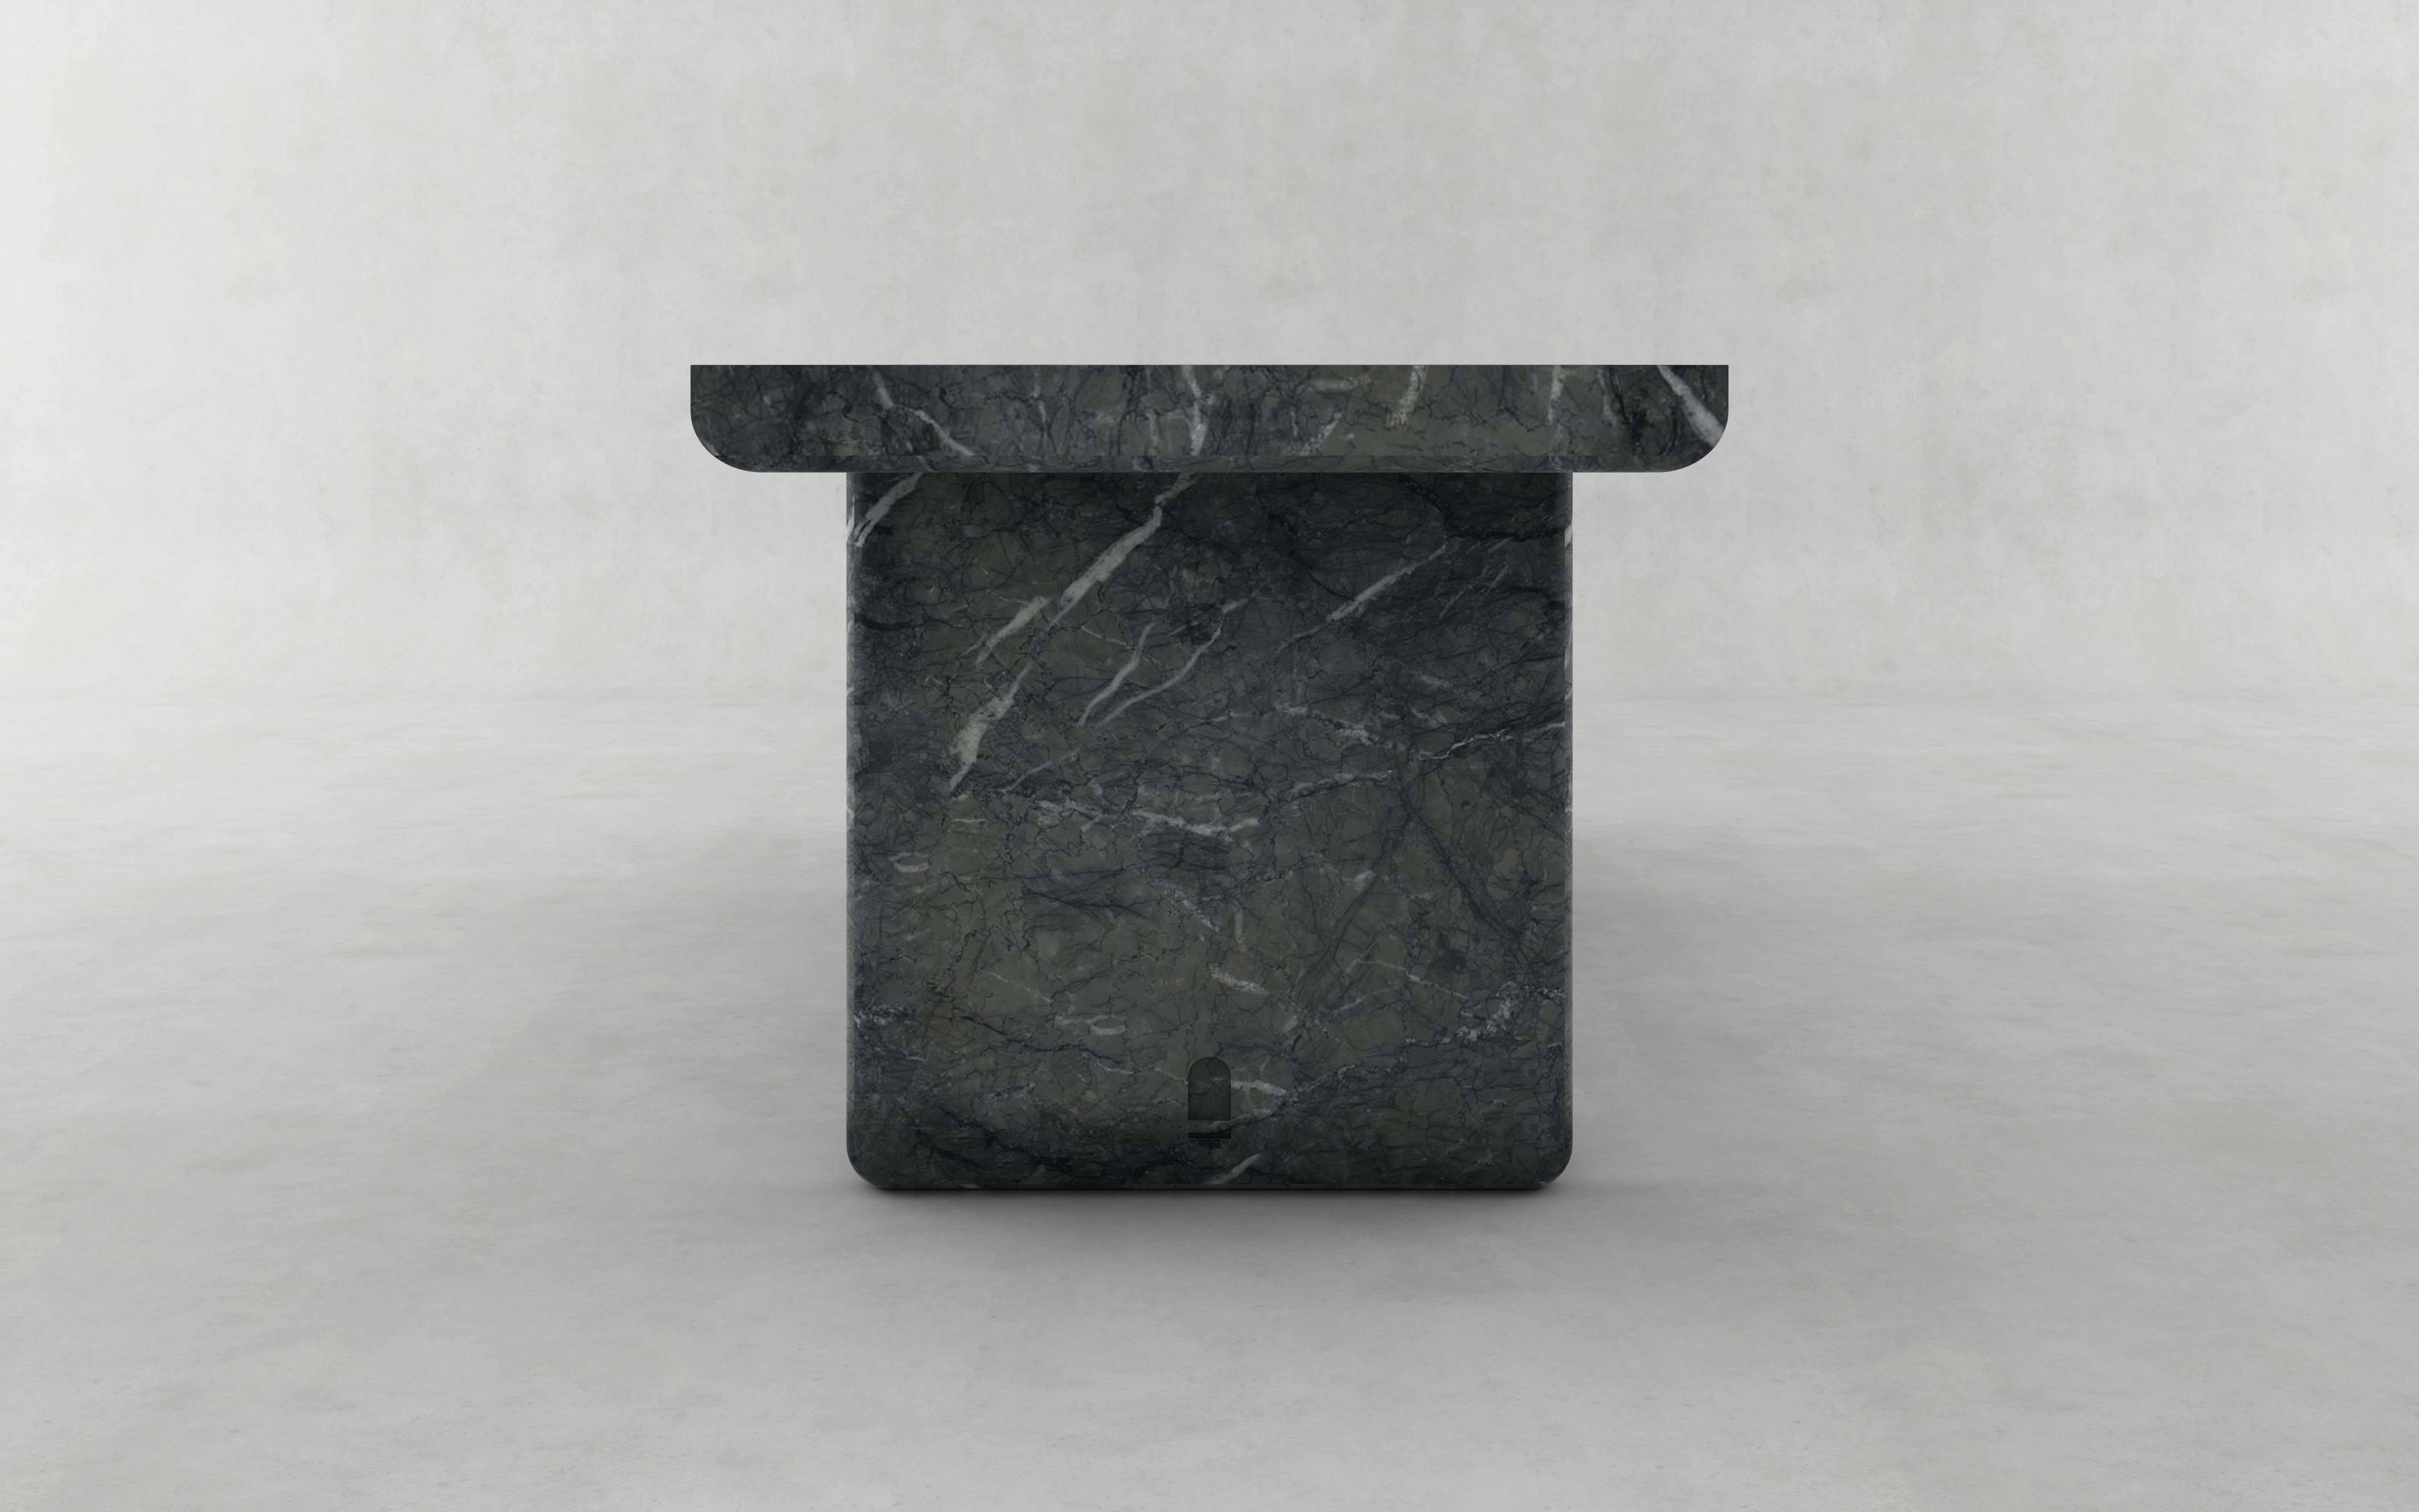 Francesco Balzano.
Green marble desk.
Dimensions: 73 x 200 x 80 cm.
Marble.
Ateliers Saint-Jacques.

Graduated from ESAG Penninghen and ENSAPLV, interior designer and architect, Francesco Balzano created his workshop January 1, 2014.
His